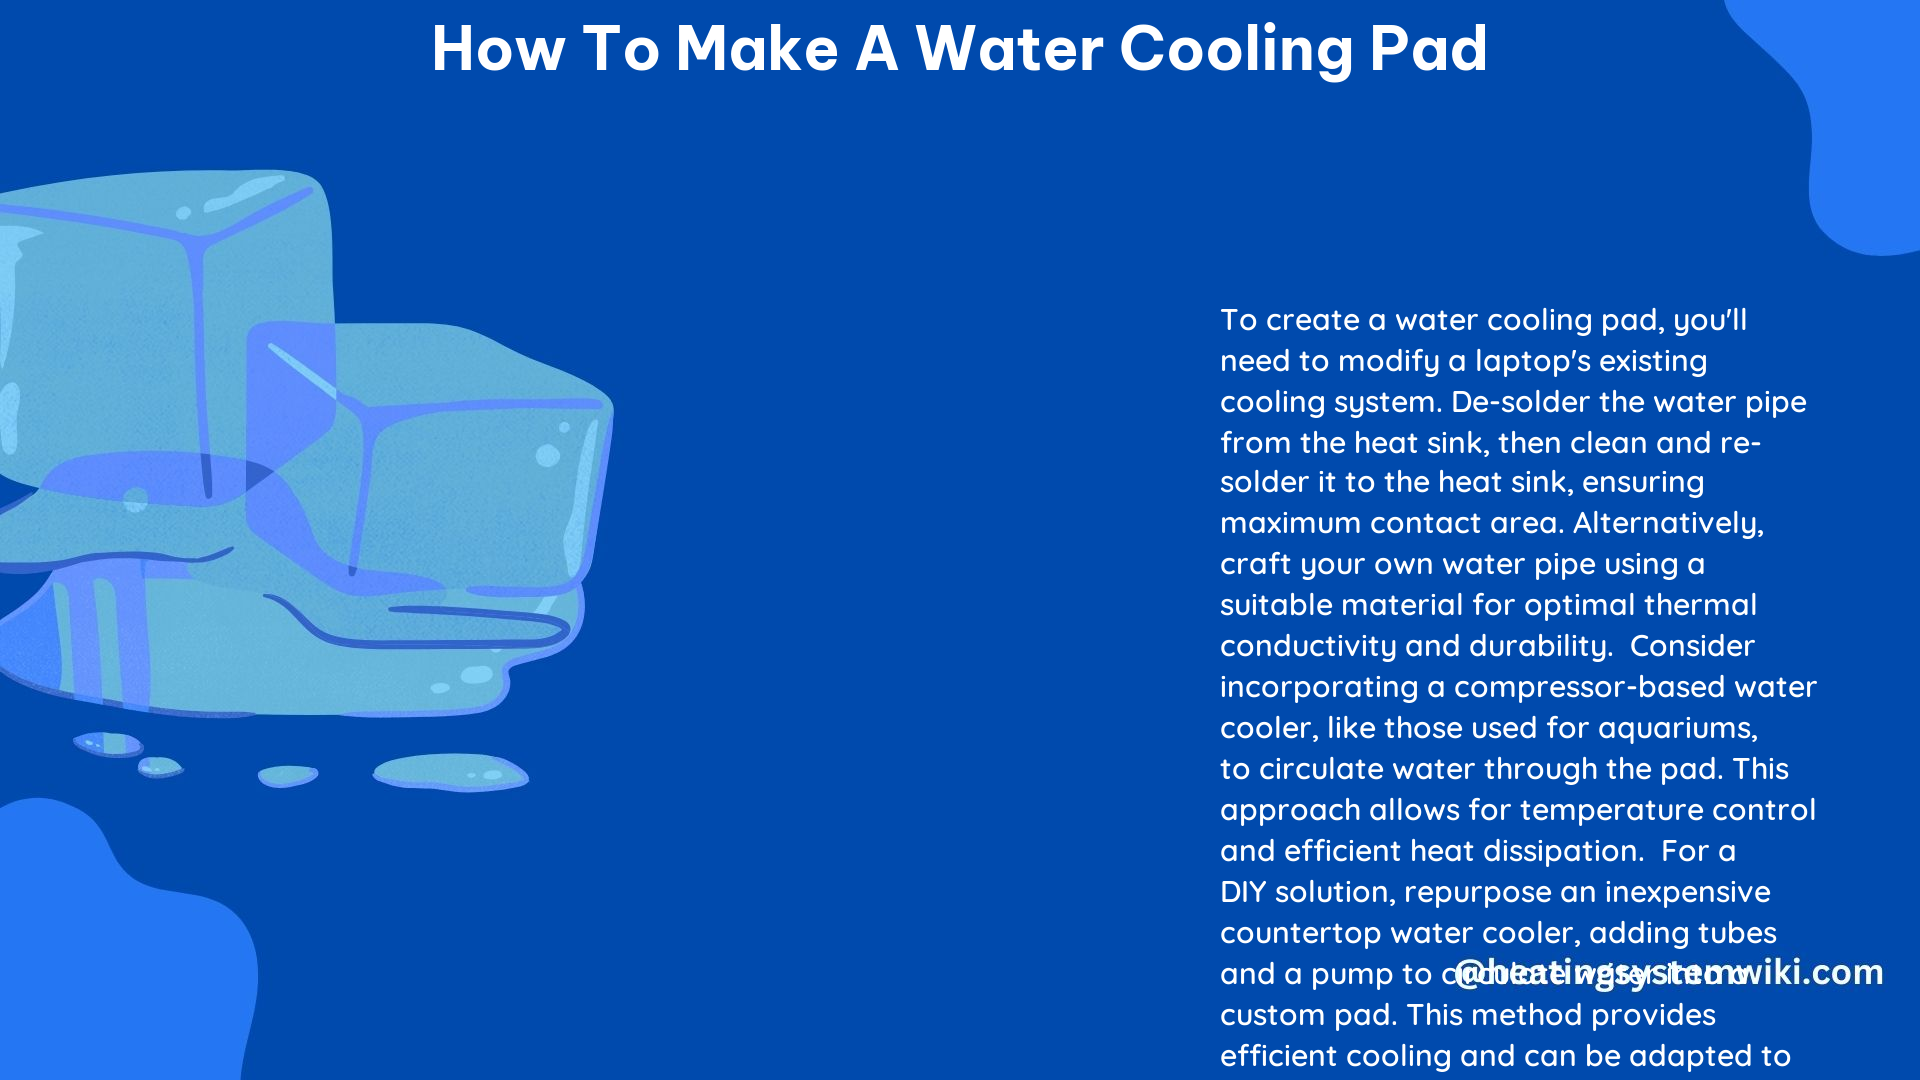 How to Make a Water Cooling Pad